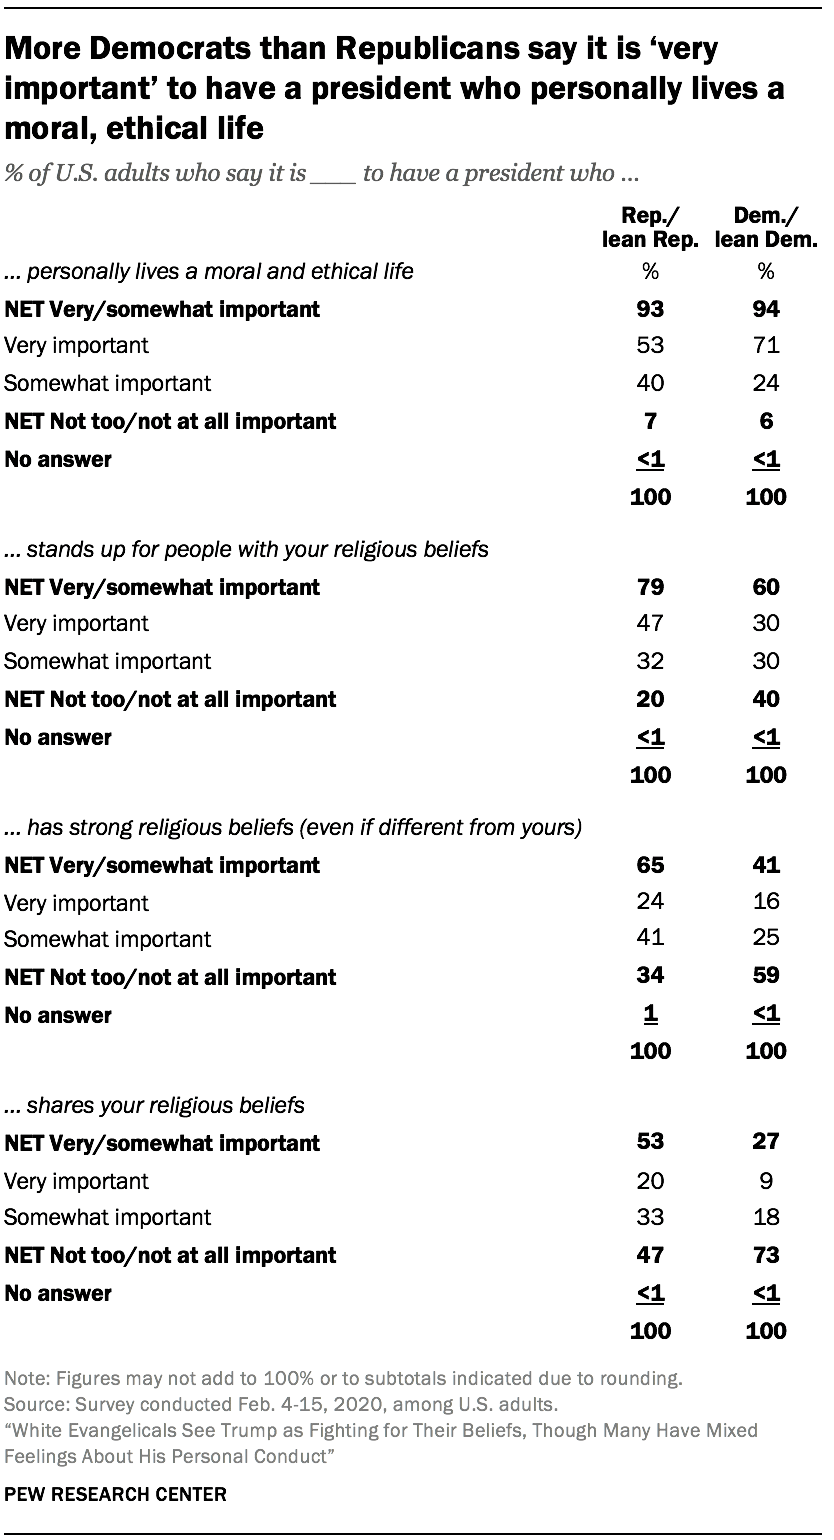 More Democrats than Republicans say it is ‘very important’ to have a president who personally lives a moral, ethical life